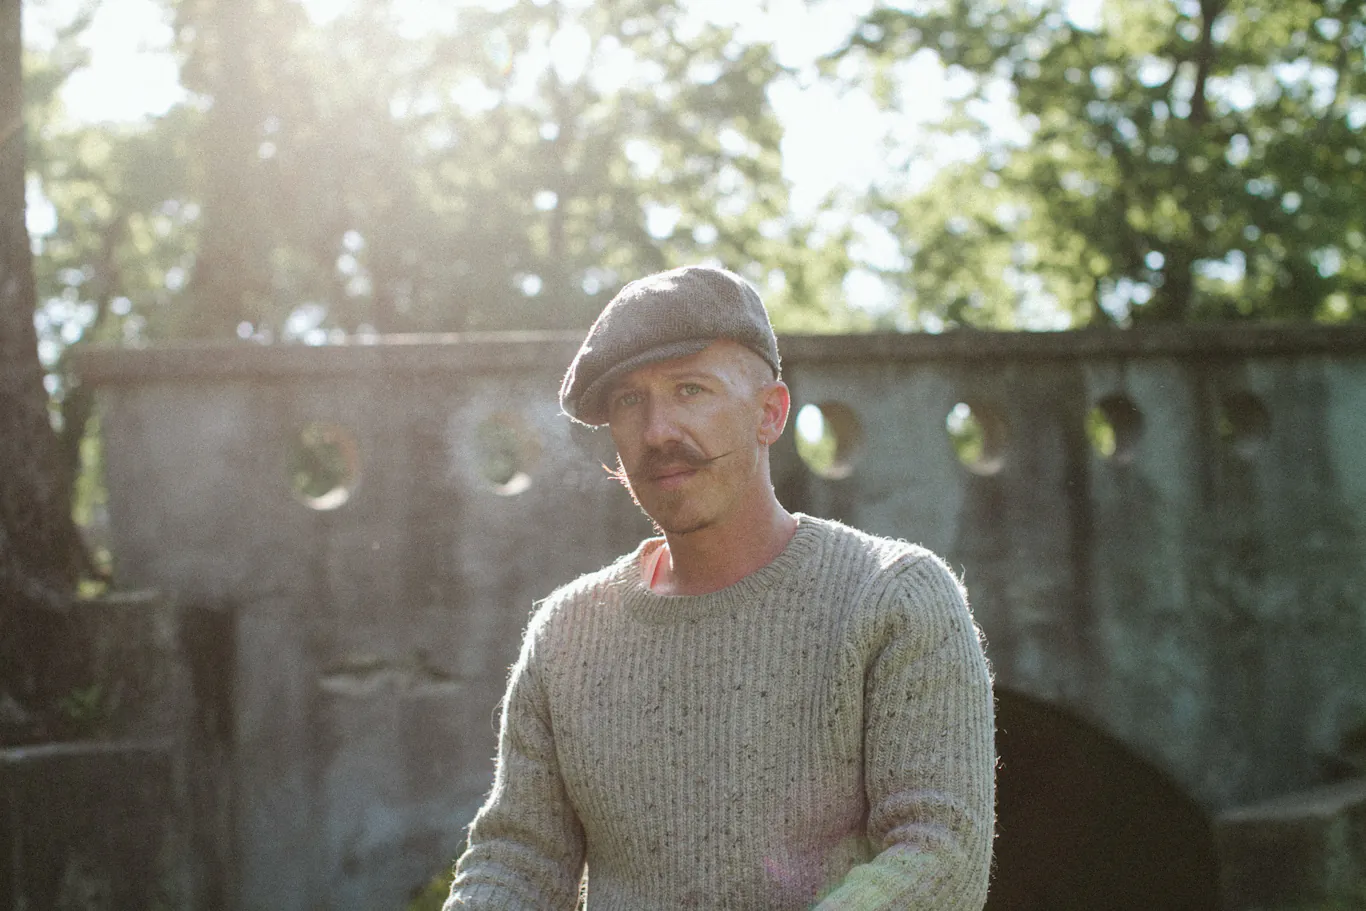 FOY VANCE & THE ULSTER ORCHESTRA celebrate ‘Joy of Nothing’ with 2 nights at Waterfront Hall, Belfast